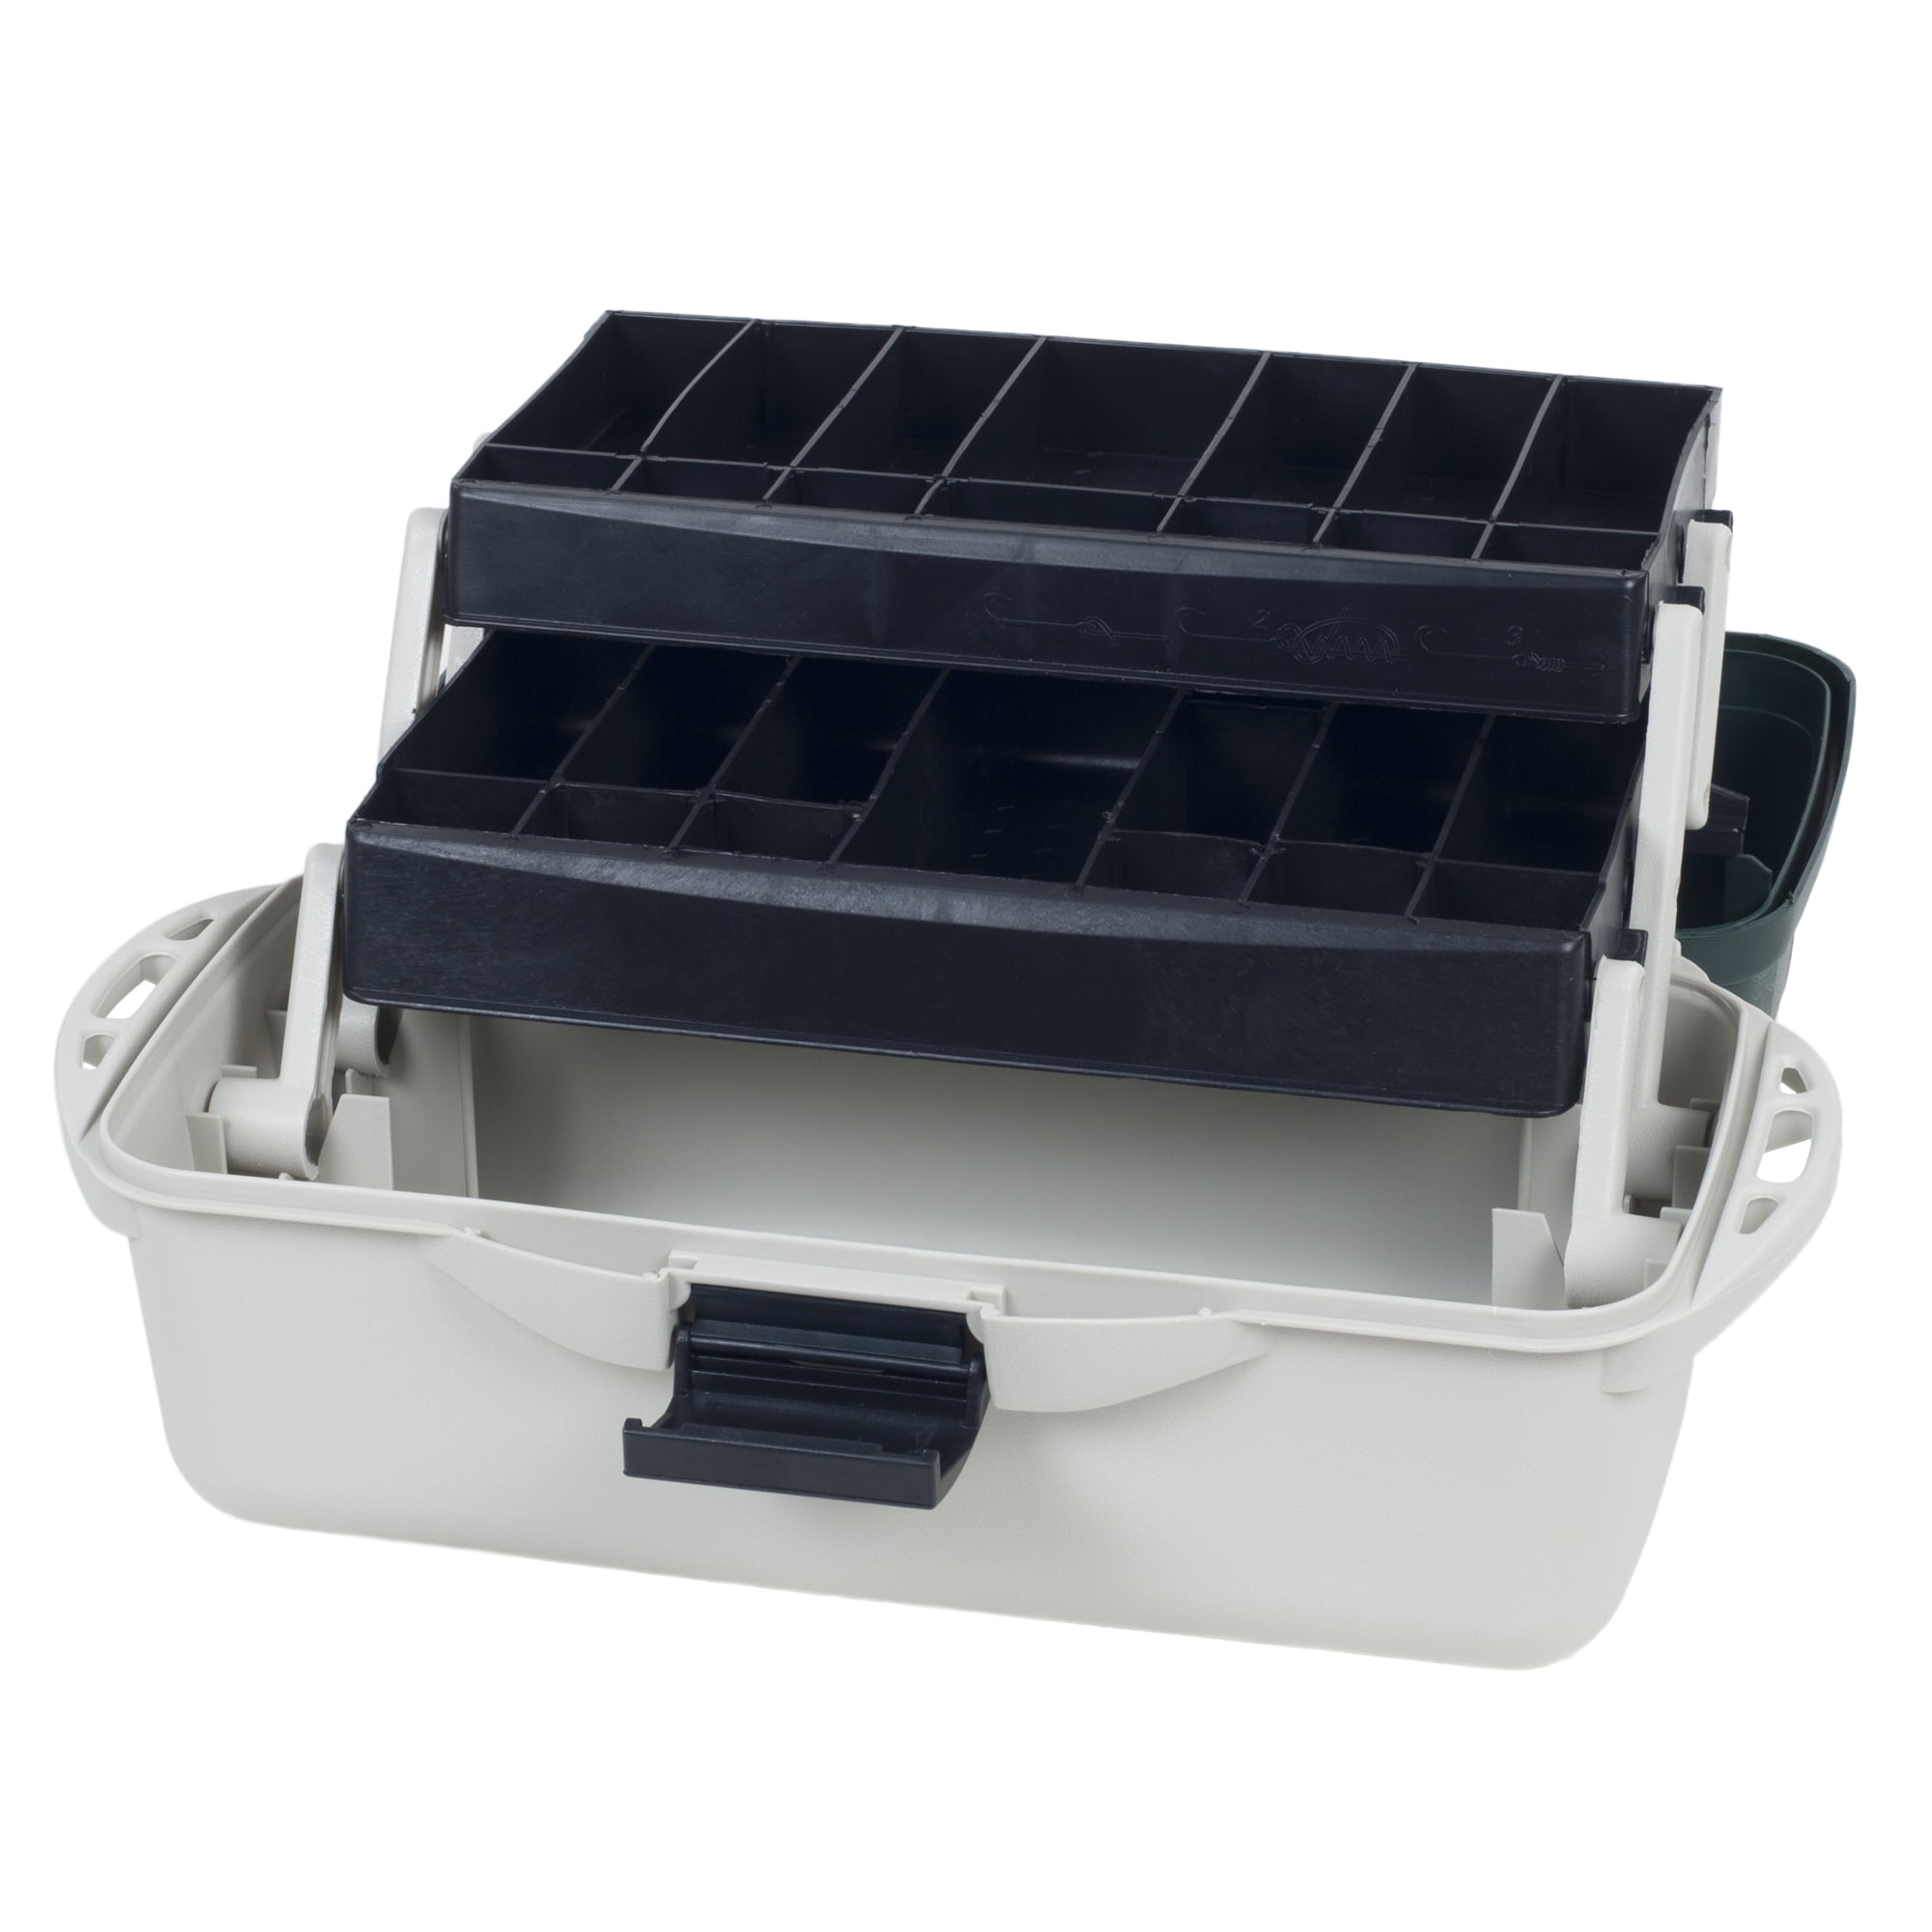 for sale online Black/Green, 13.5x8.5x7.5-Inch Flambeau Tackle 2 Tray Tackle Box 